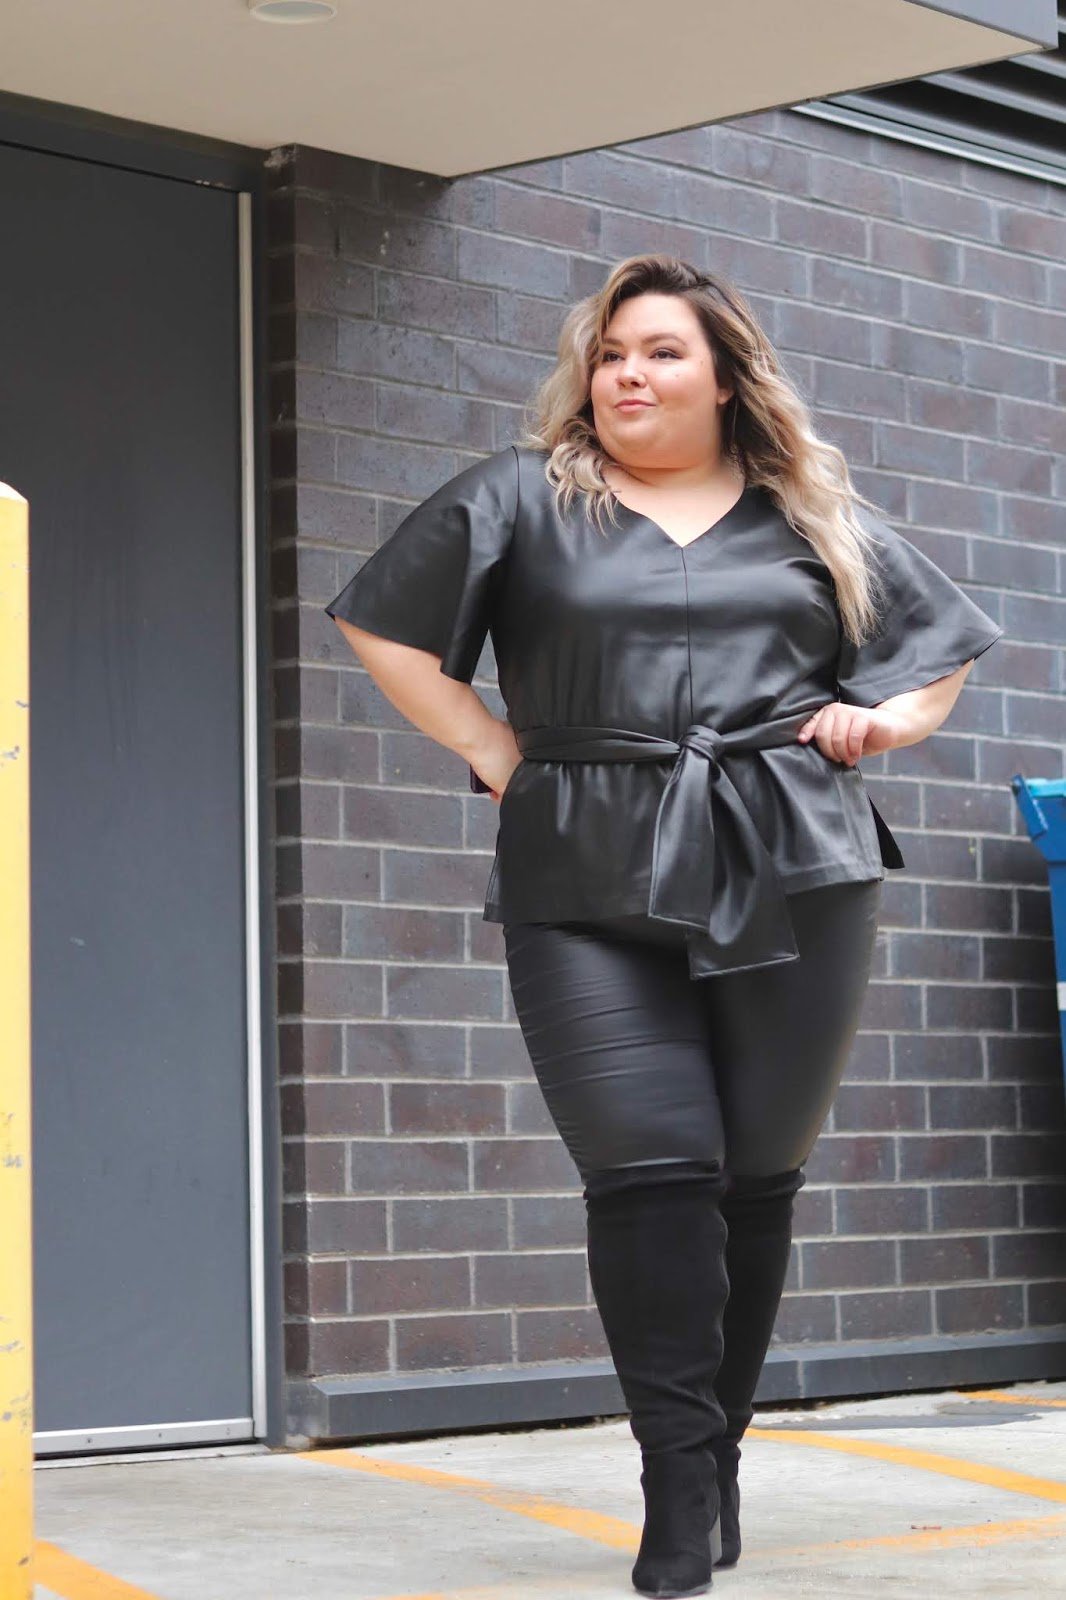 Chicago Plus Size Petite Fashion Blogger Natalie in the City reviews Eloquii's faux leather outfit.